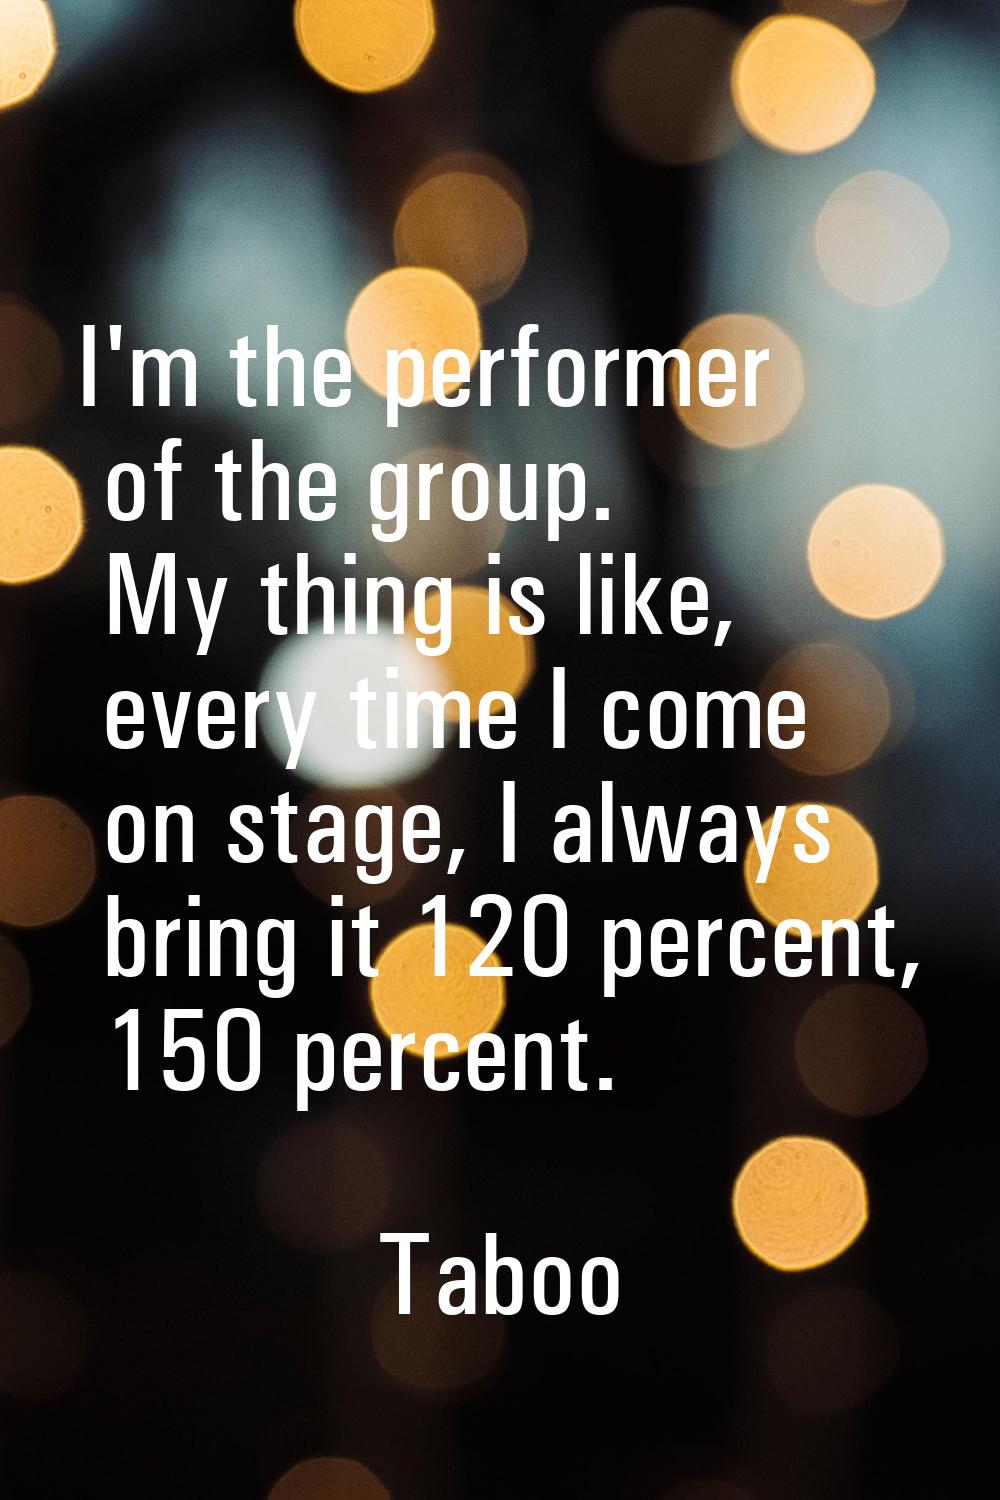 I'm the performer of the group. My thing is like, every time I come on stage, I always bring it 120